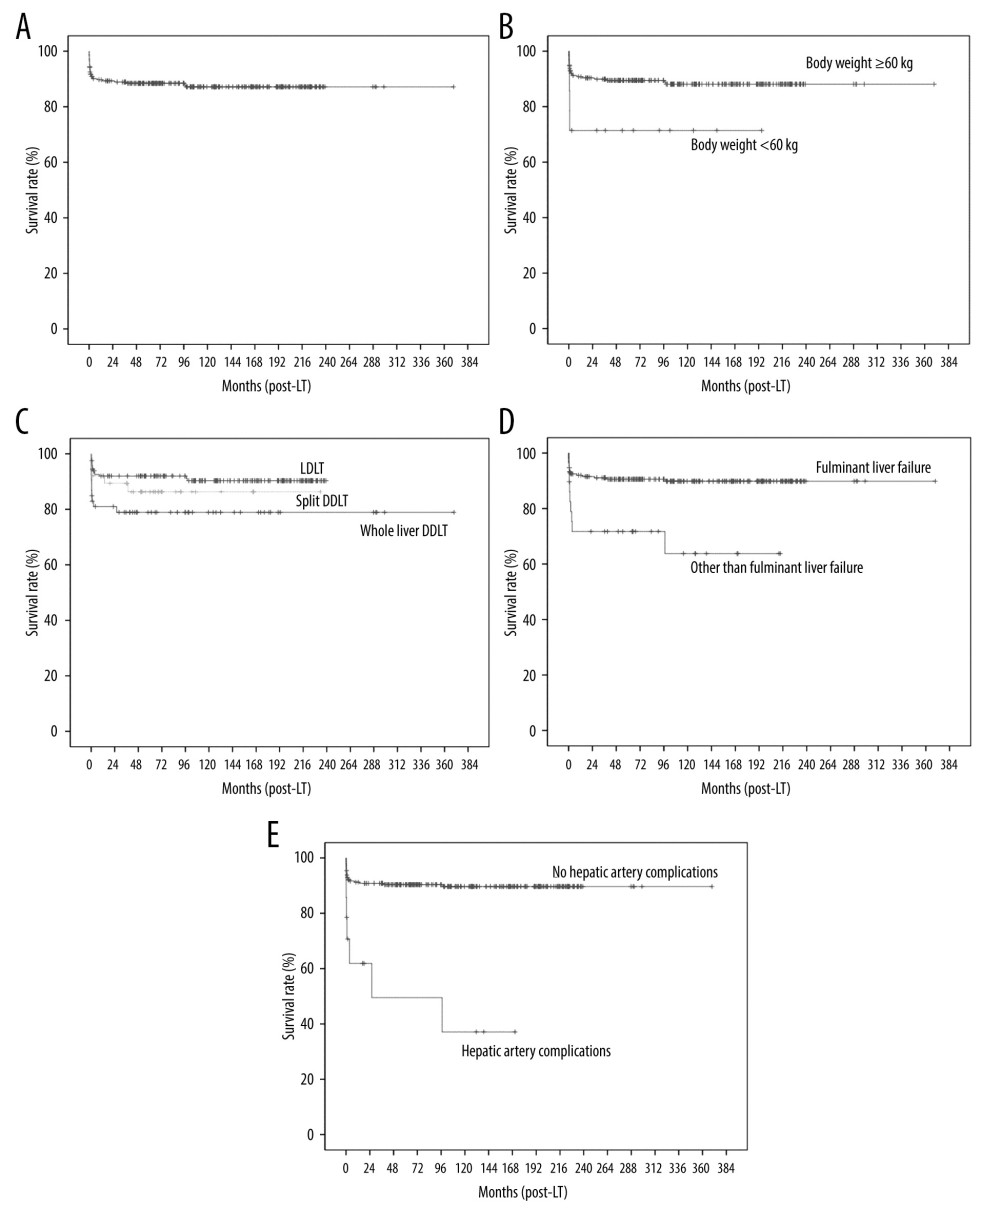 Kaplan-Meier analysis of graft survival: (A) all patients, (B) according to body weight, (C) according to type of LT (LDLT vs split DDLT vs whole-liver DDLT), (D) according to liver disease (fulminant liver failure vs other than fulminant liver failure), and (E) according to hepatic artery complications.